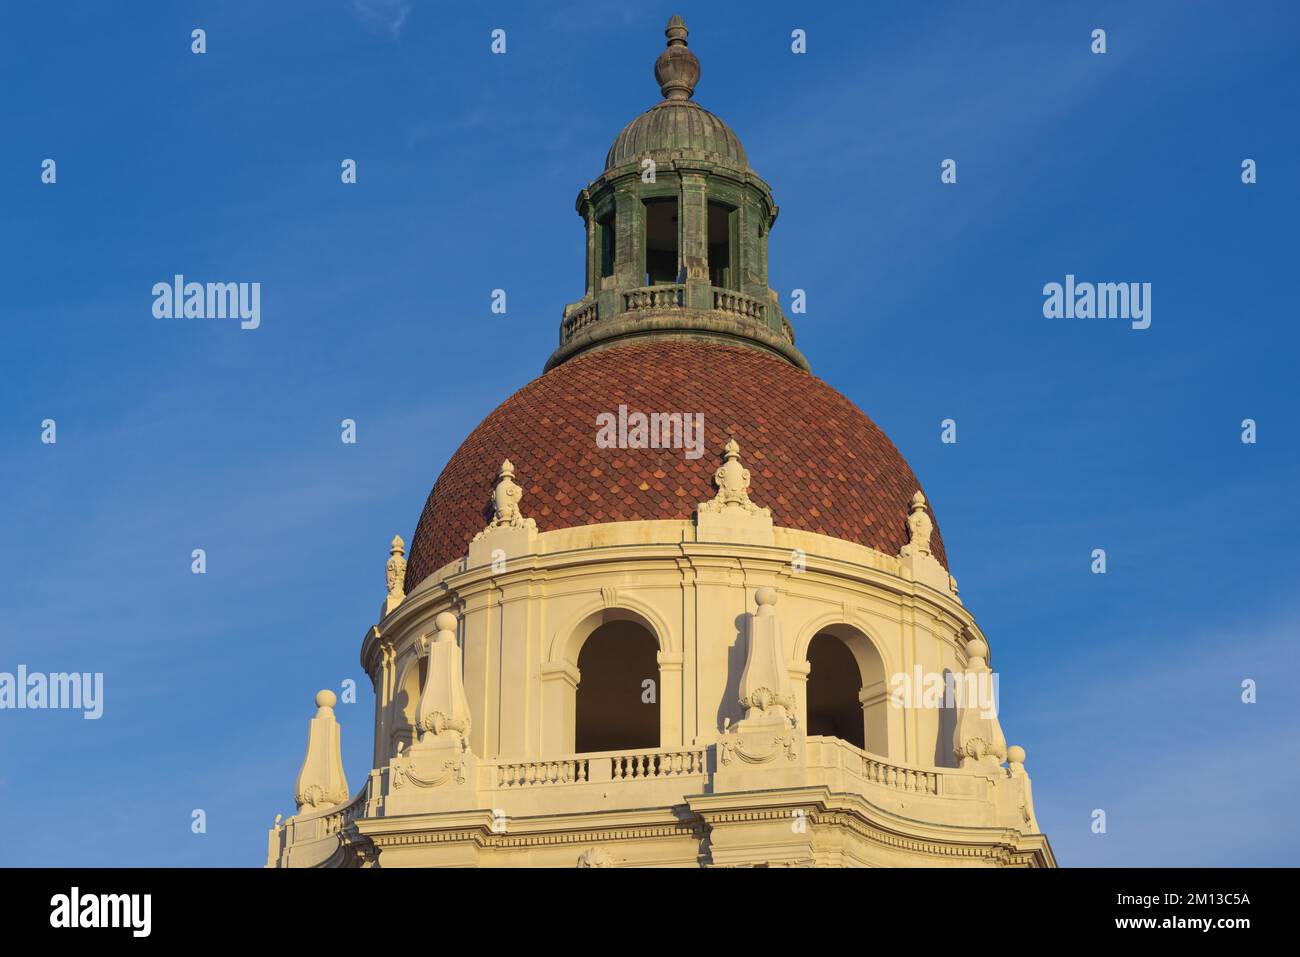 Dome of the Pasadena City Hall main tower shown against a blue sky. Pasadena is located in Los Angeles County. Stock Photo